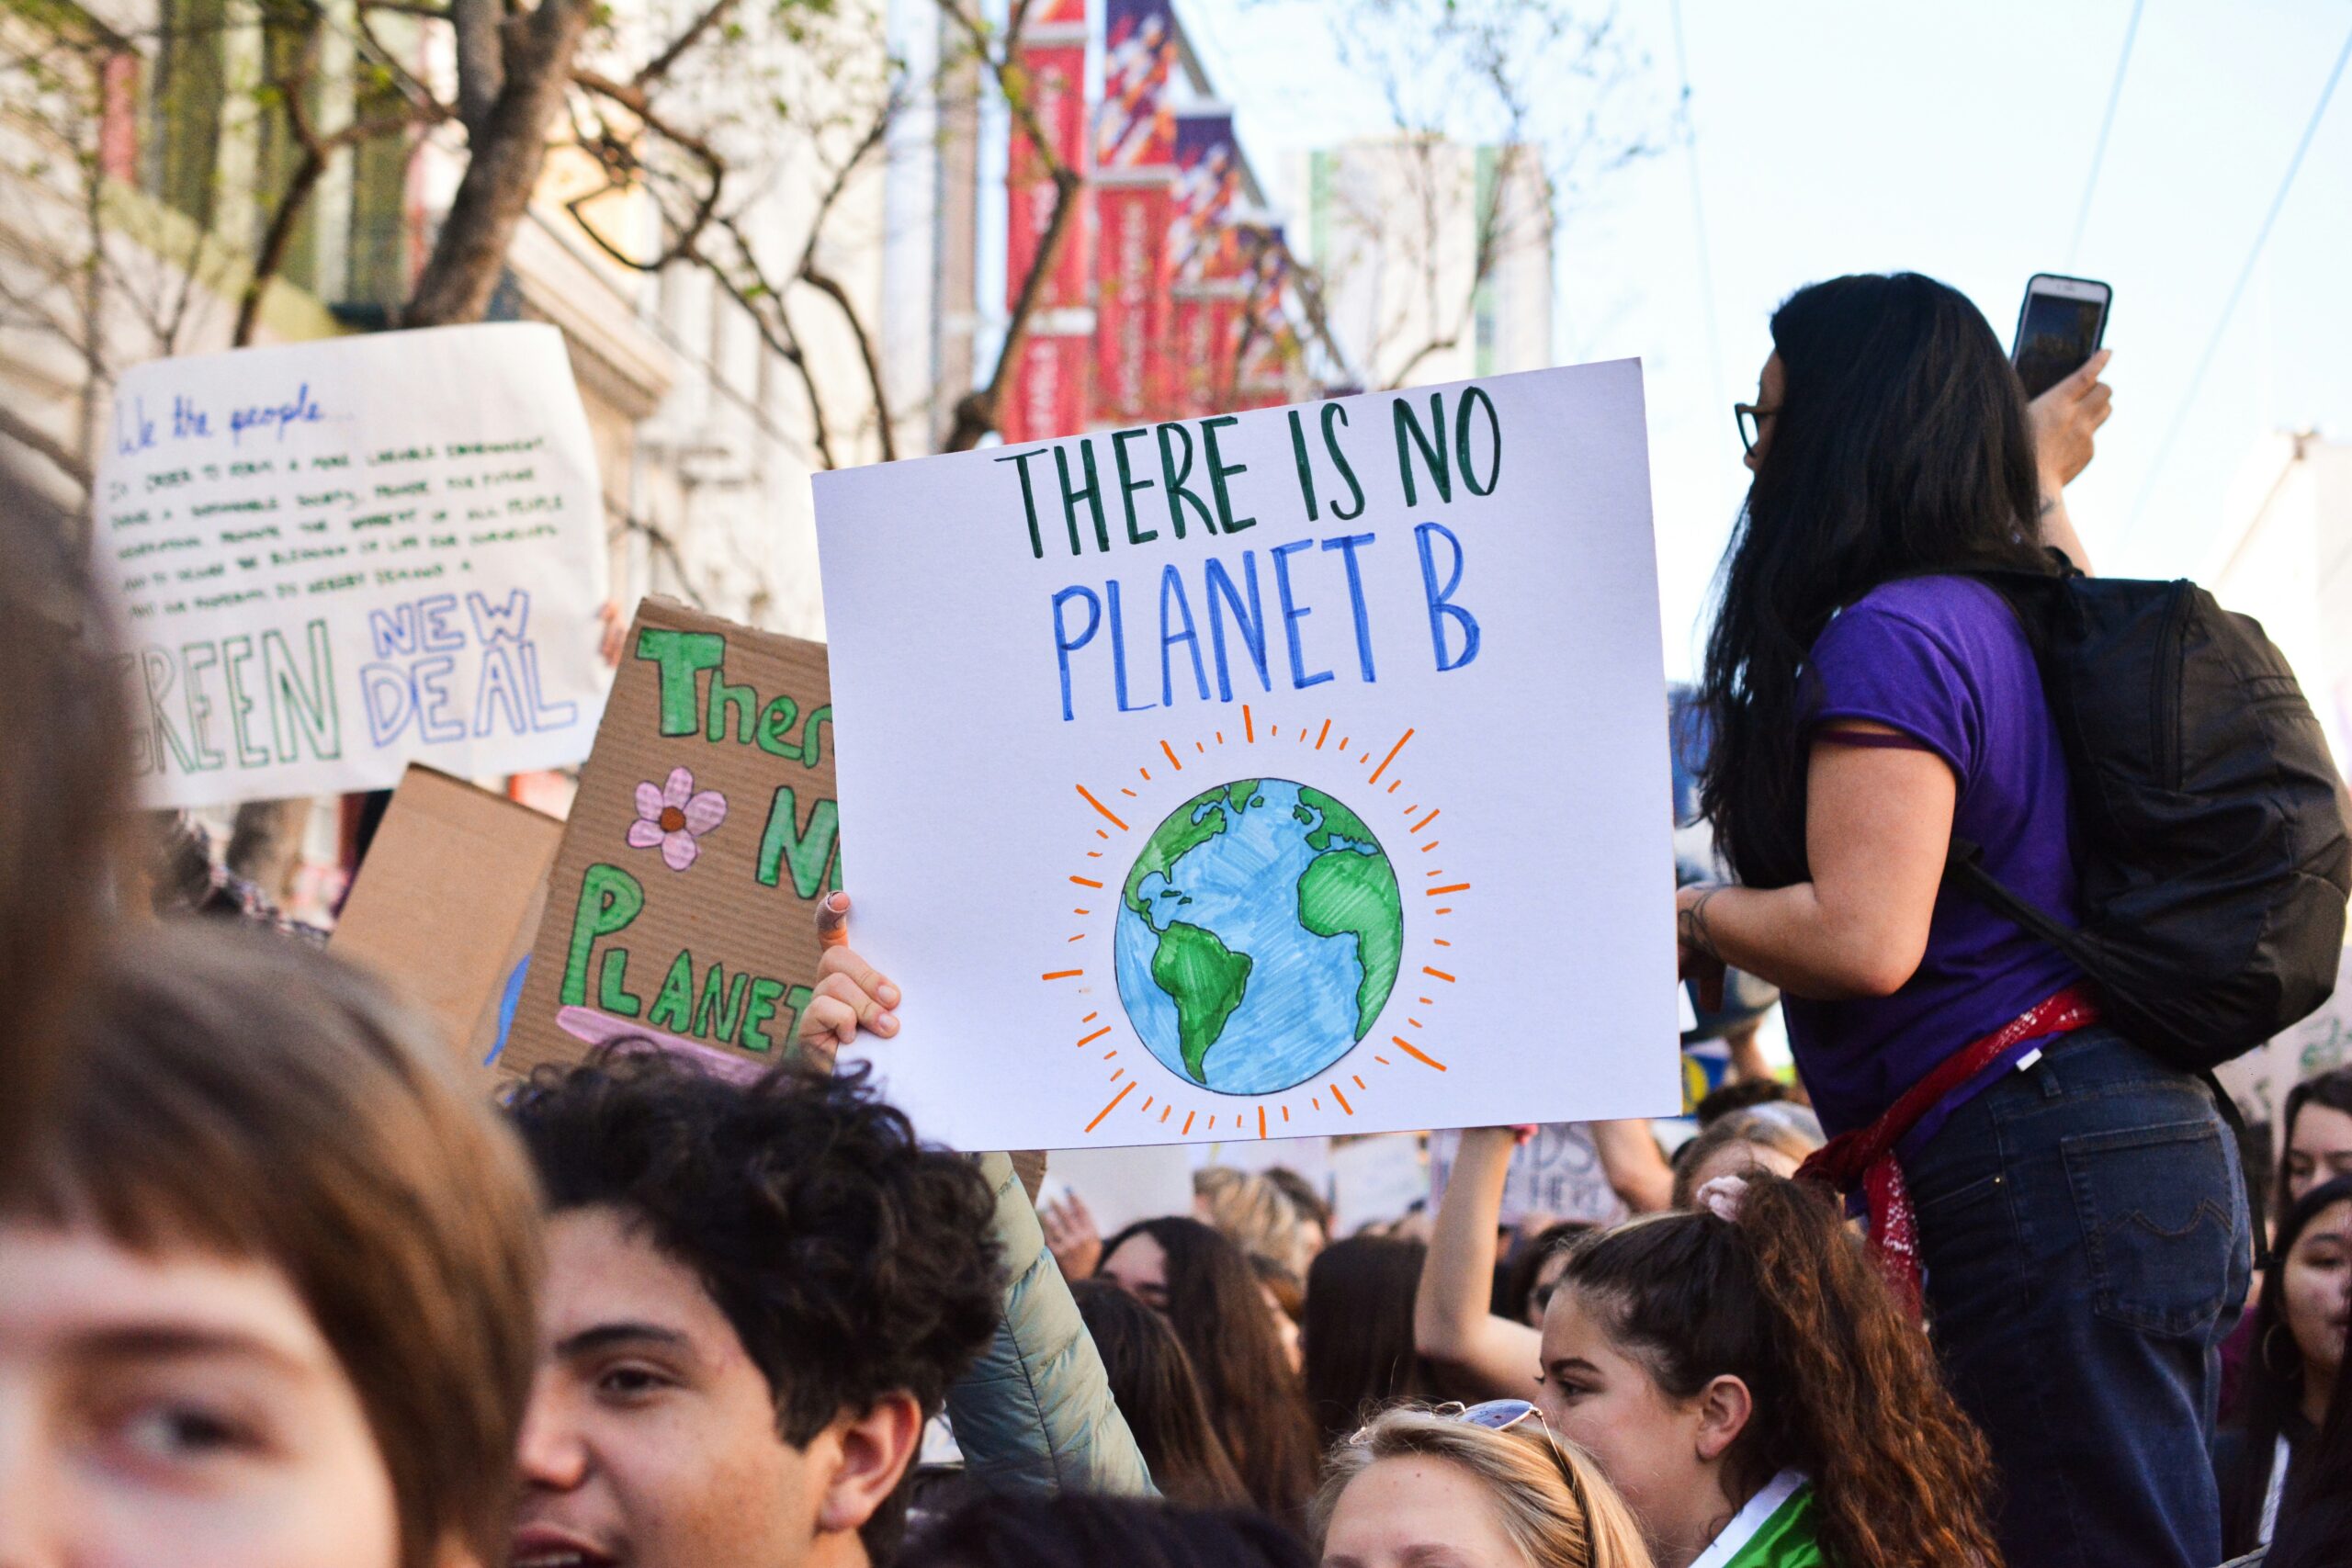 "There is no Planet B," picket poster pictured at a climate protest rally.